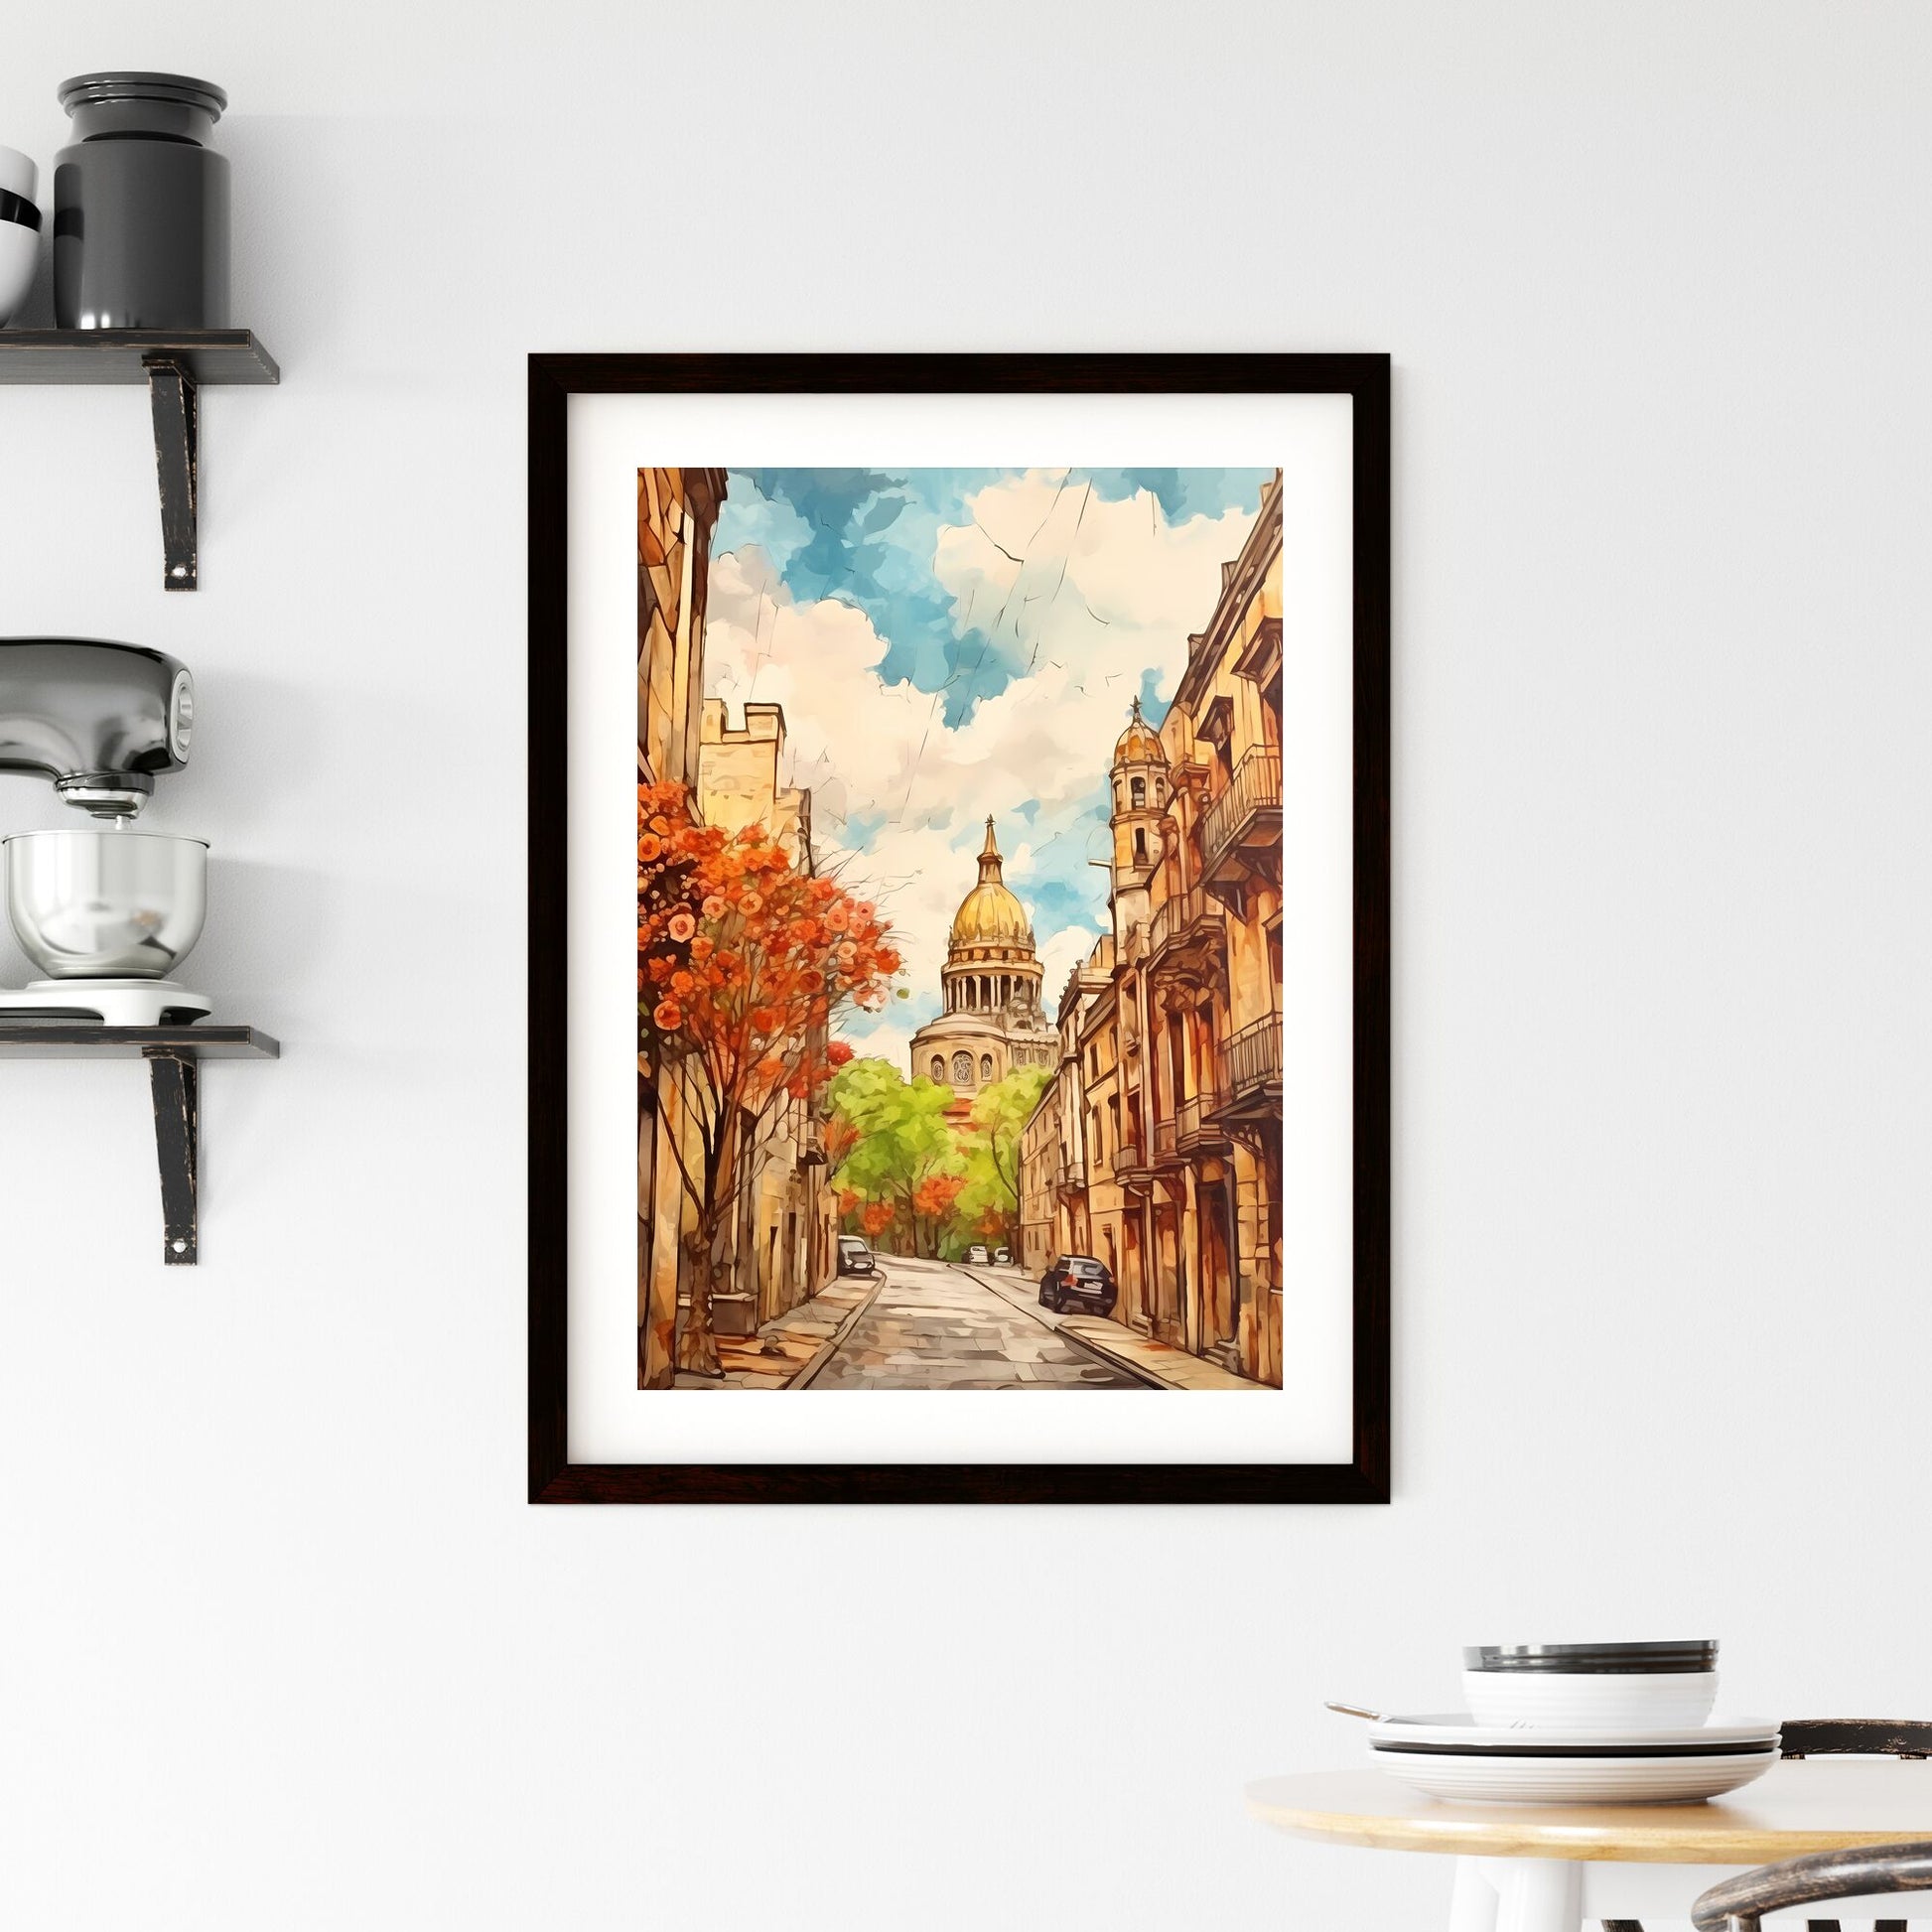 A Poster of cinco de mayo holiday - A Street With Buildings And Trees And A Building With A Dome Default Title